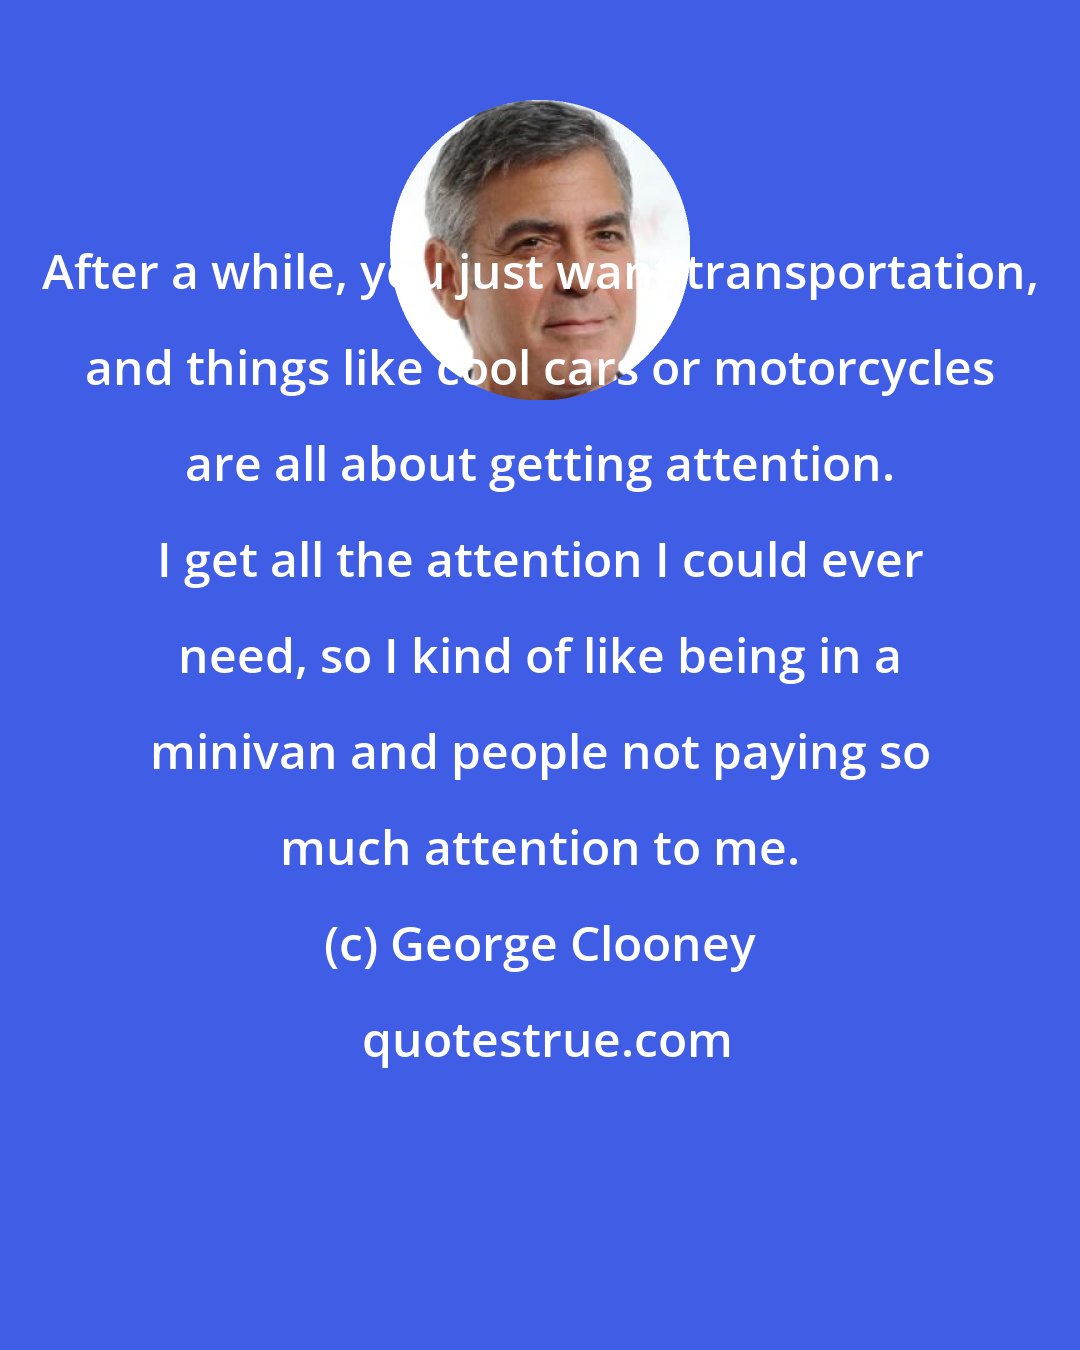 George Clooney: After a while, you just want transportation, and things like cool cars or motorcycles are all about getting attention. I get all the attention I could ever need, so I kind of like being in a minivan and people not paying so much attention to me.